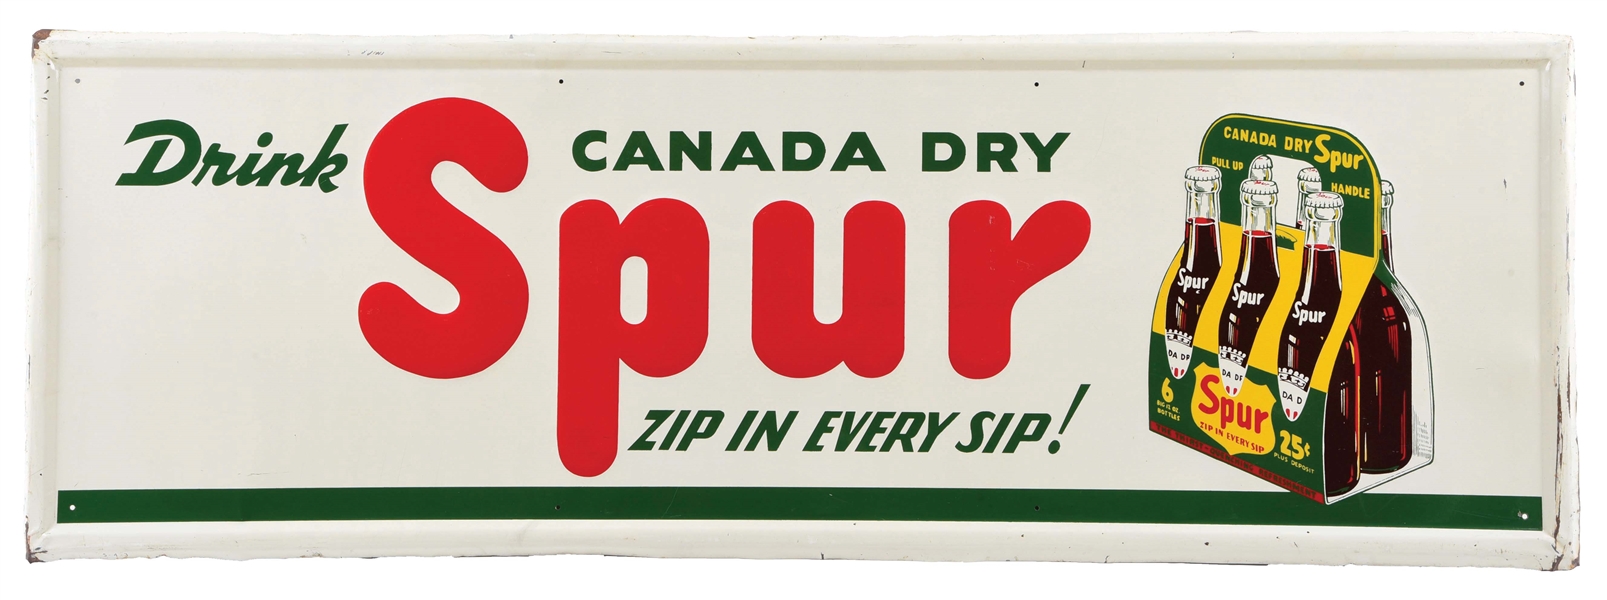 DRINK CANADA DRY SPUR 6-PACK SIGN W/ 6-PACK OF BOTTLES GRAPHIC.